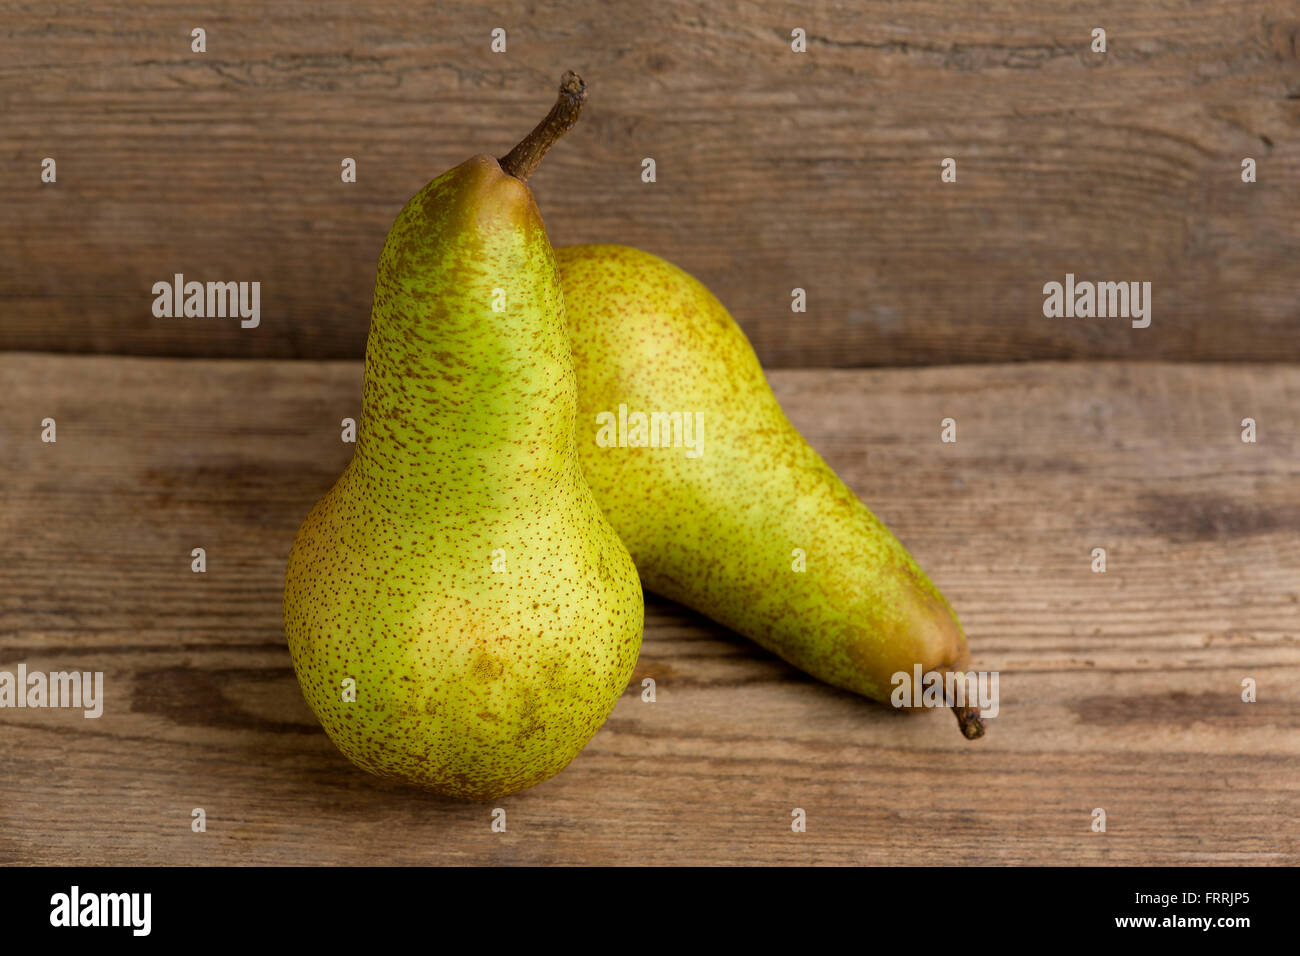 Two pears on wooden background, natural light Stock Photo